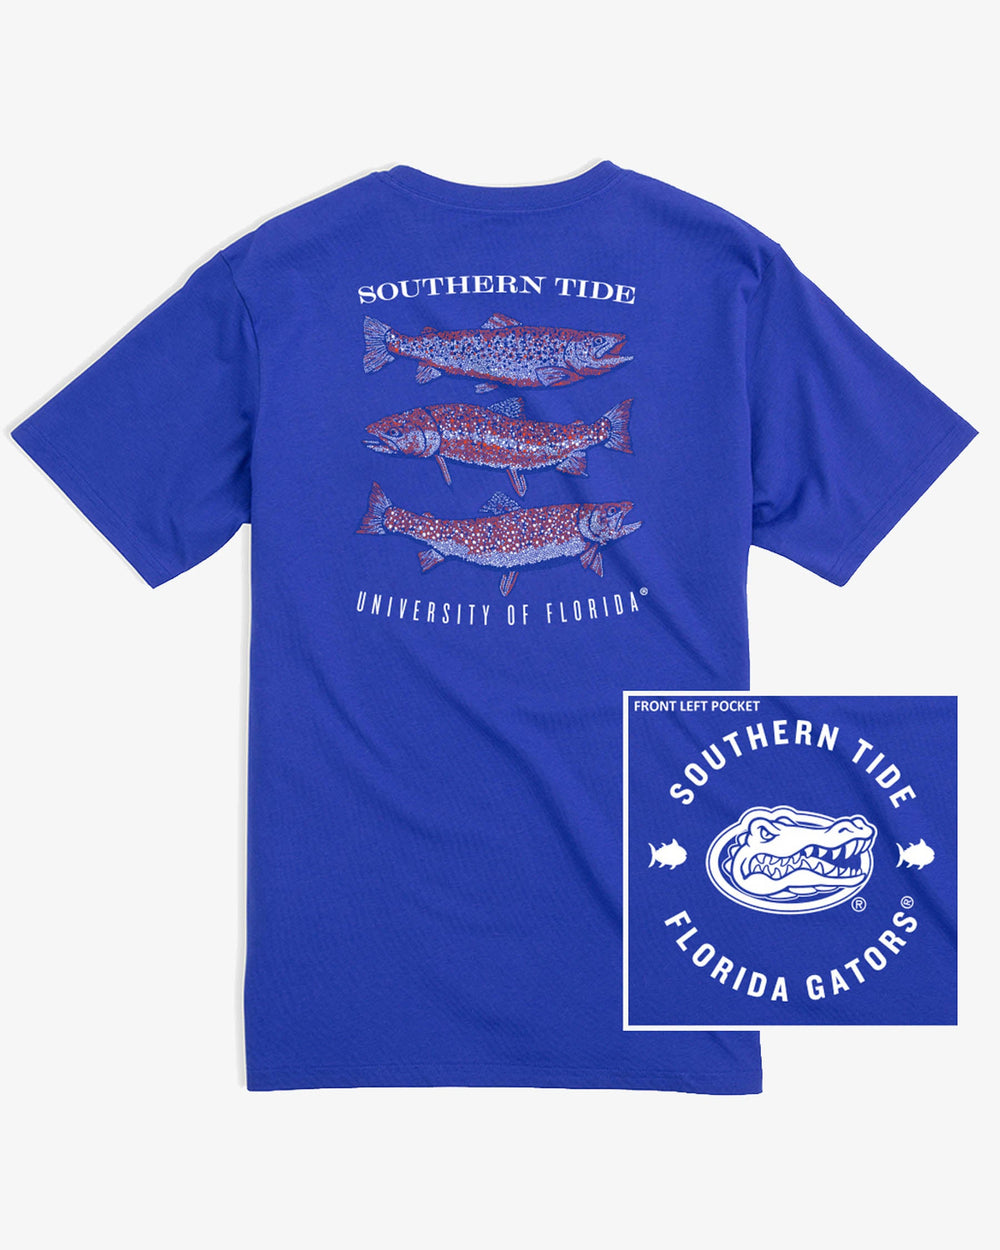 The front and back view of the Florida Gators Spotted Trout T-Shirt by Southern Tide - University Blue